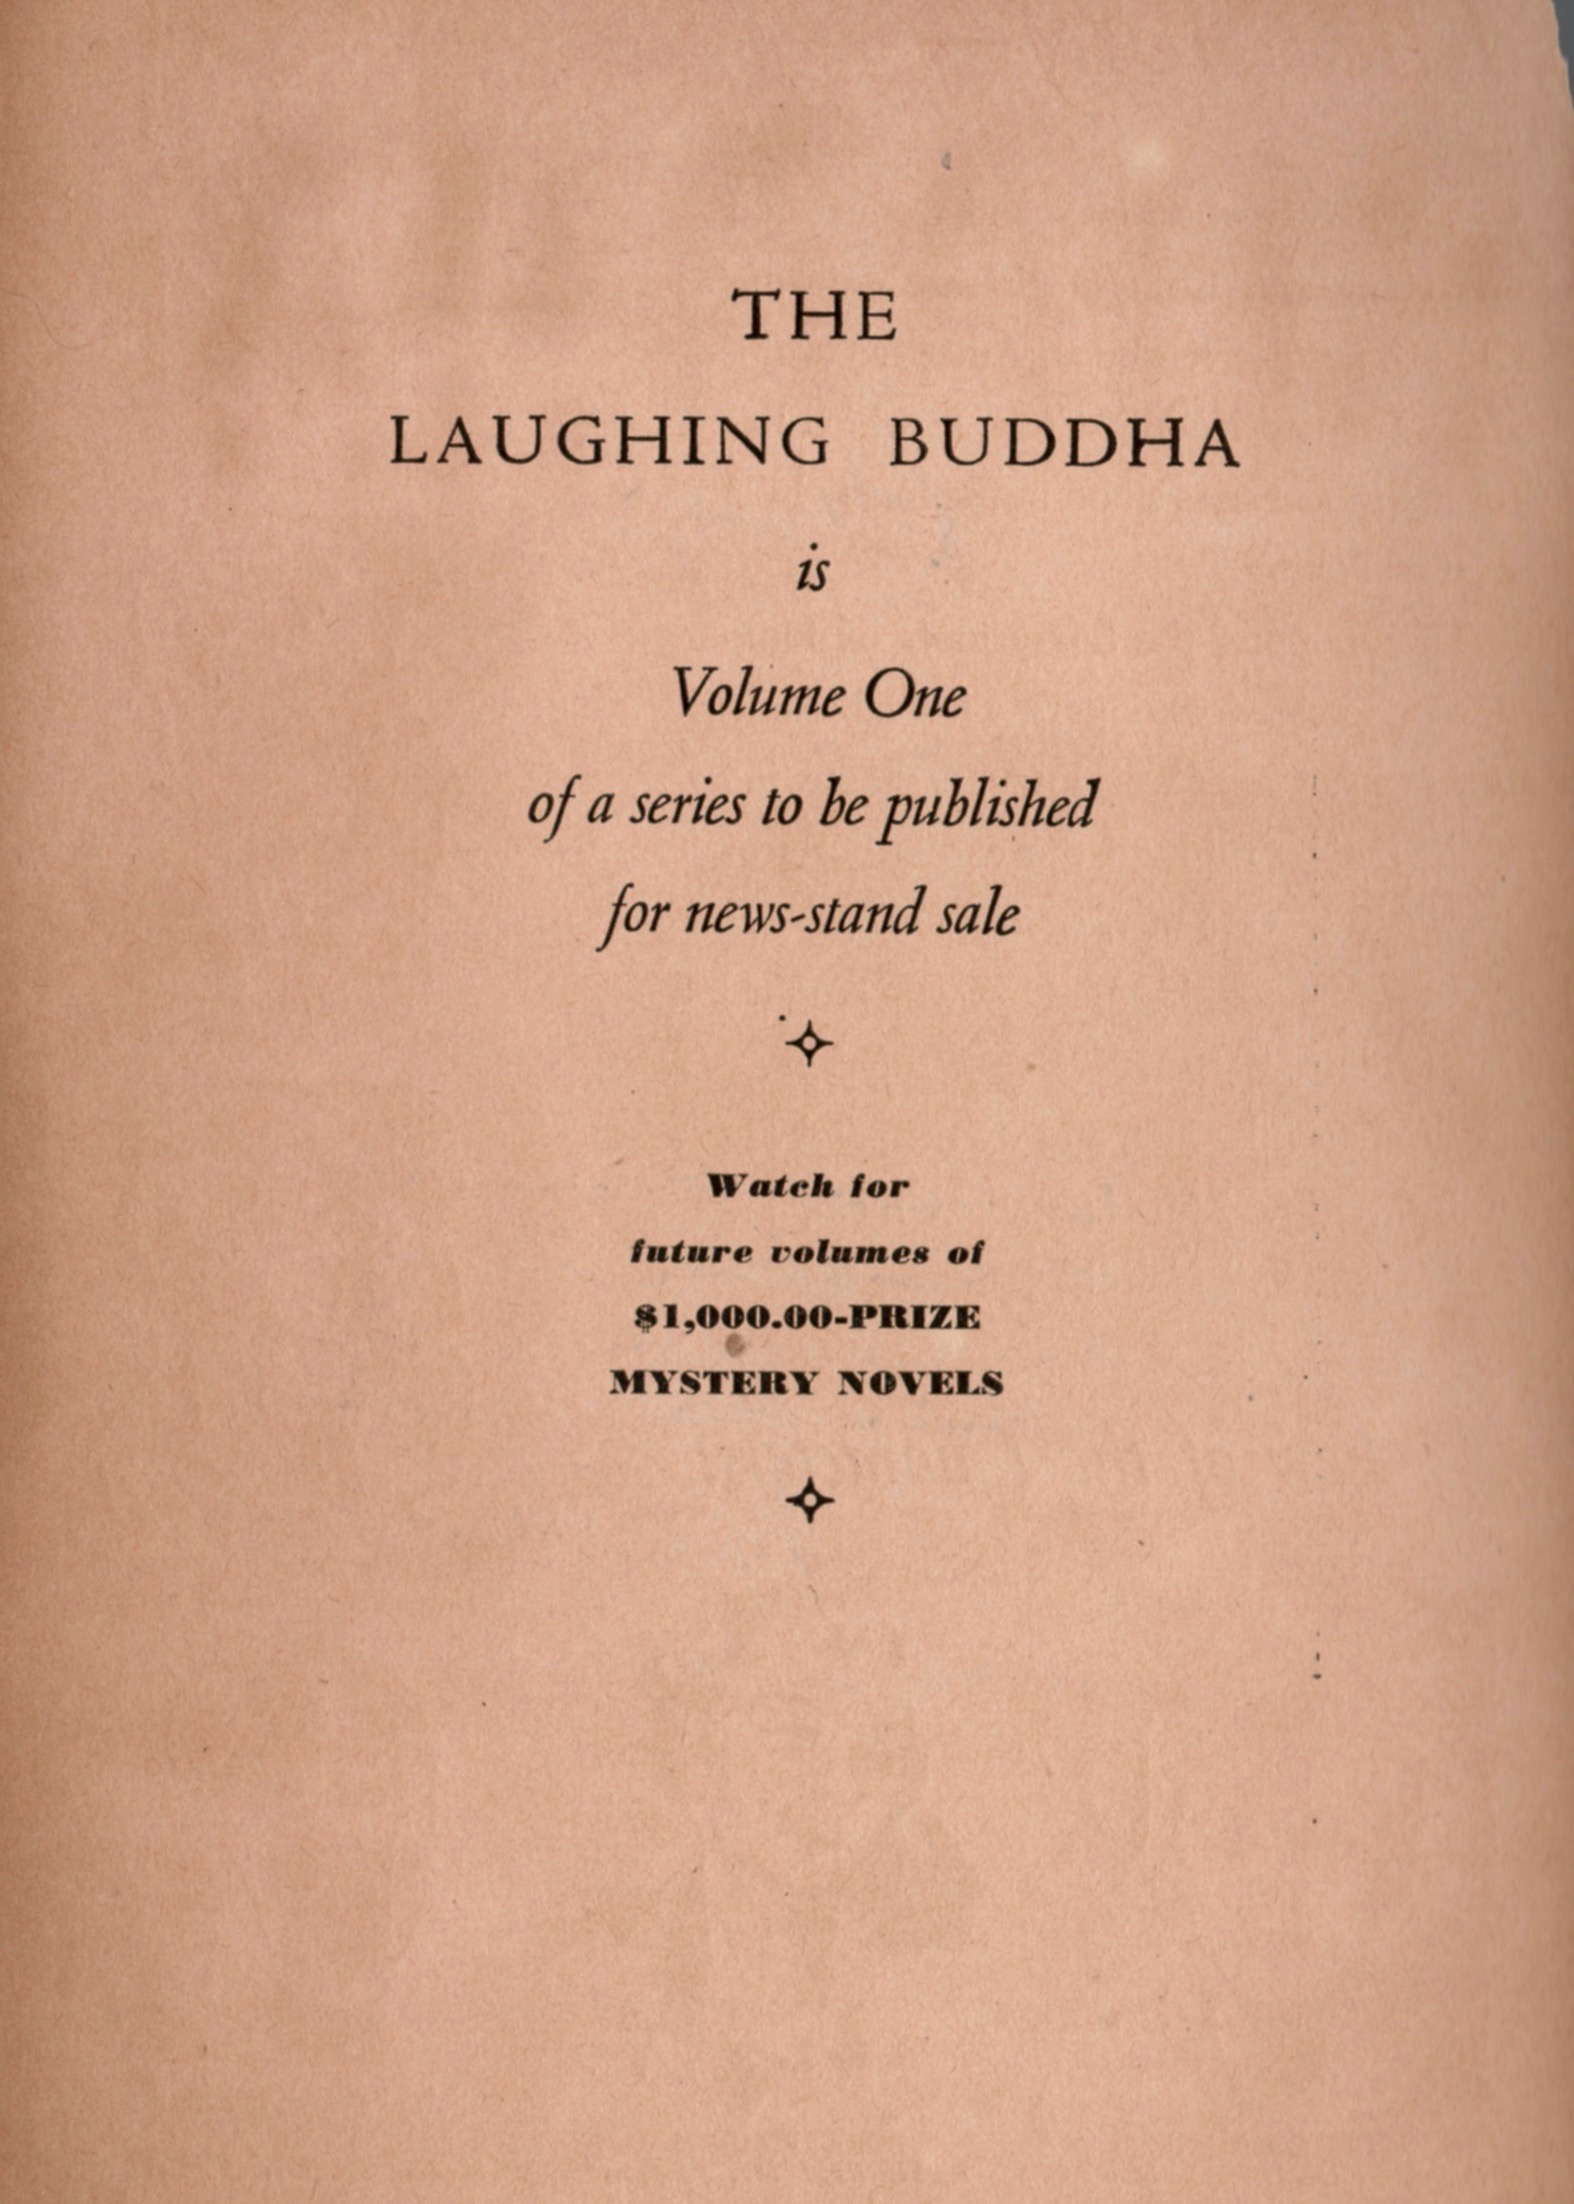 Laughing Buddha title and half title.jpg